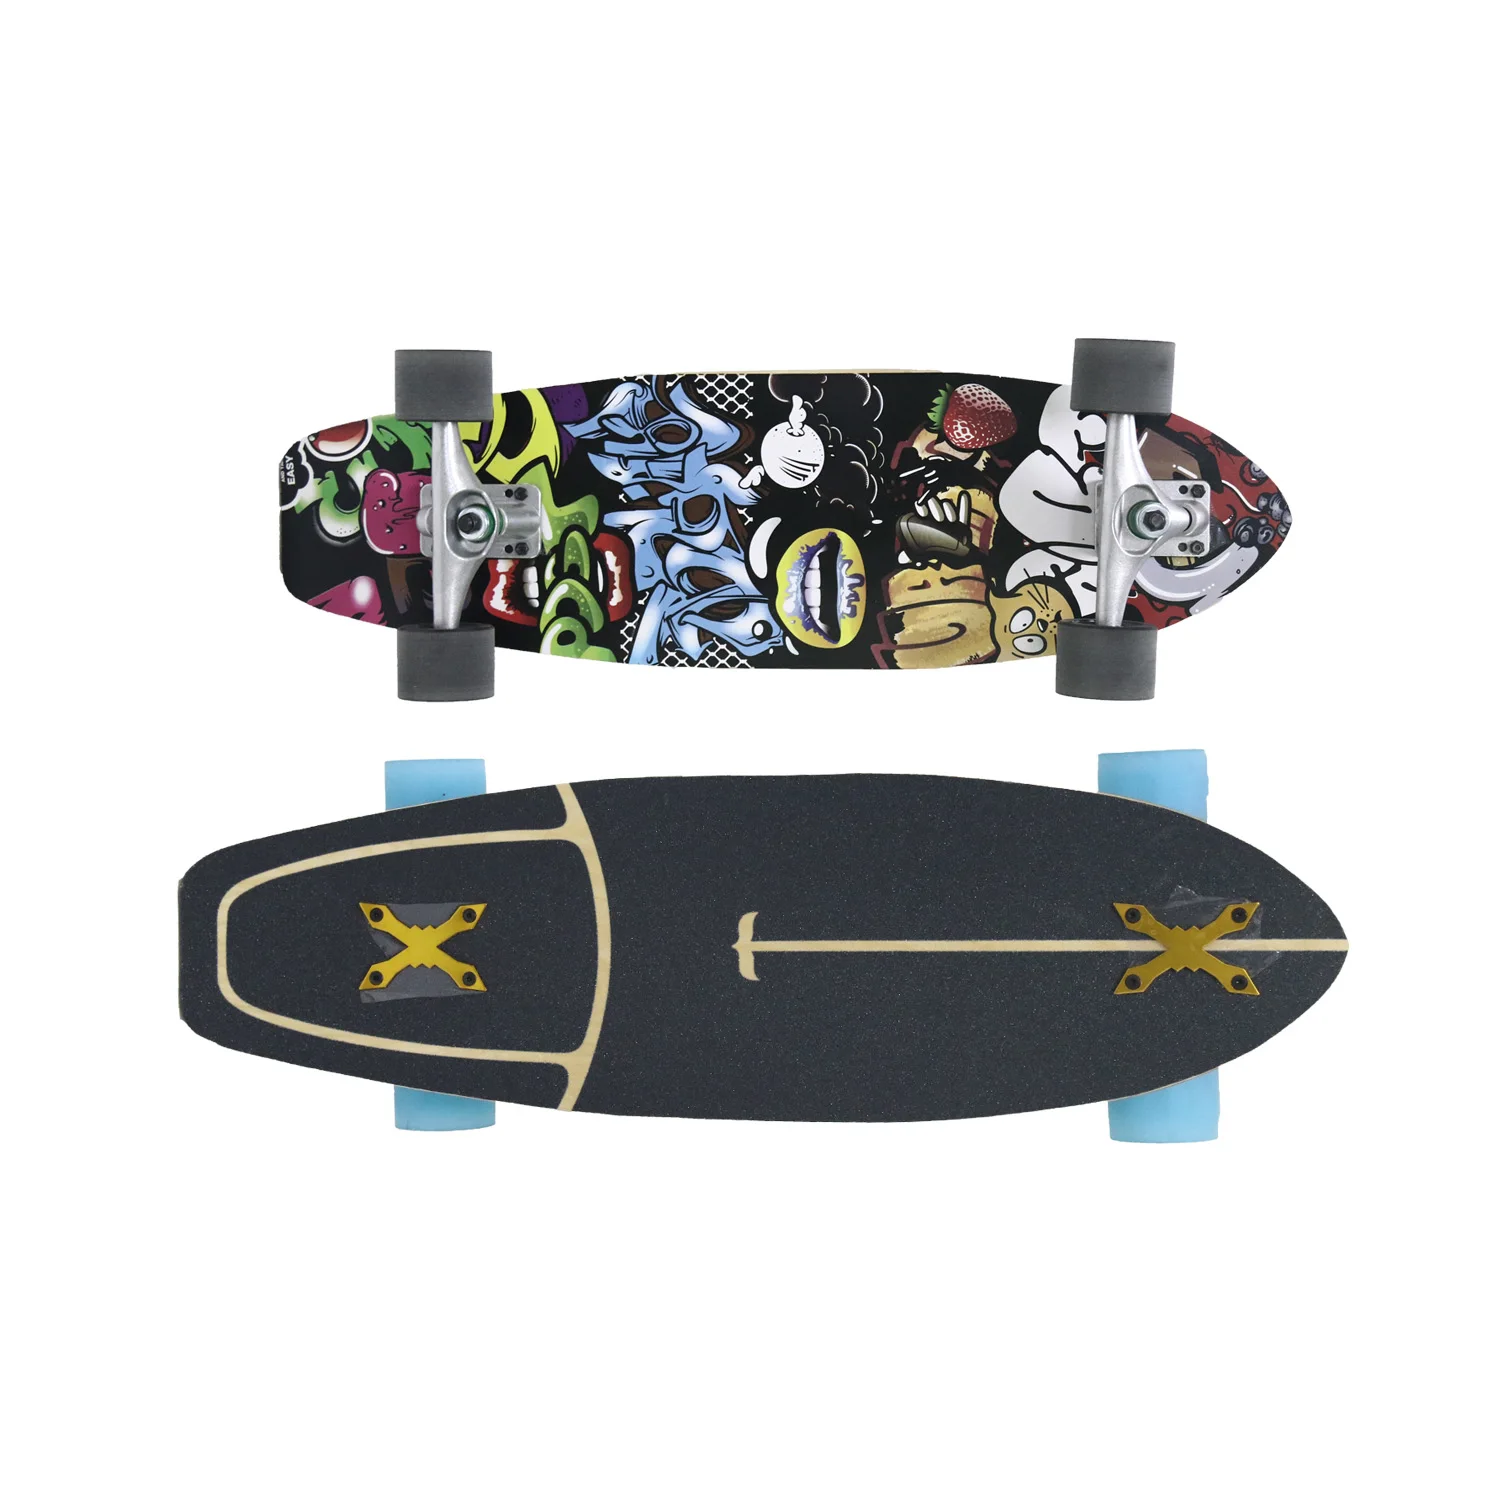 
7 Ply Northeast Maple Land Surf Skateboard 26X7.5 Surfing Skateboard for Adult Wholesale 